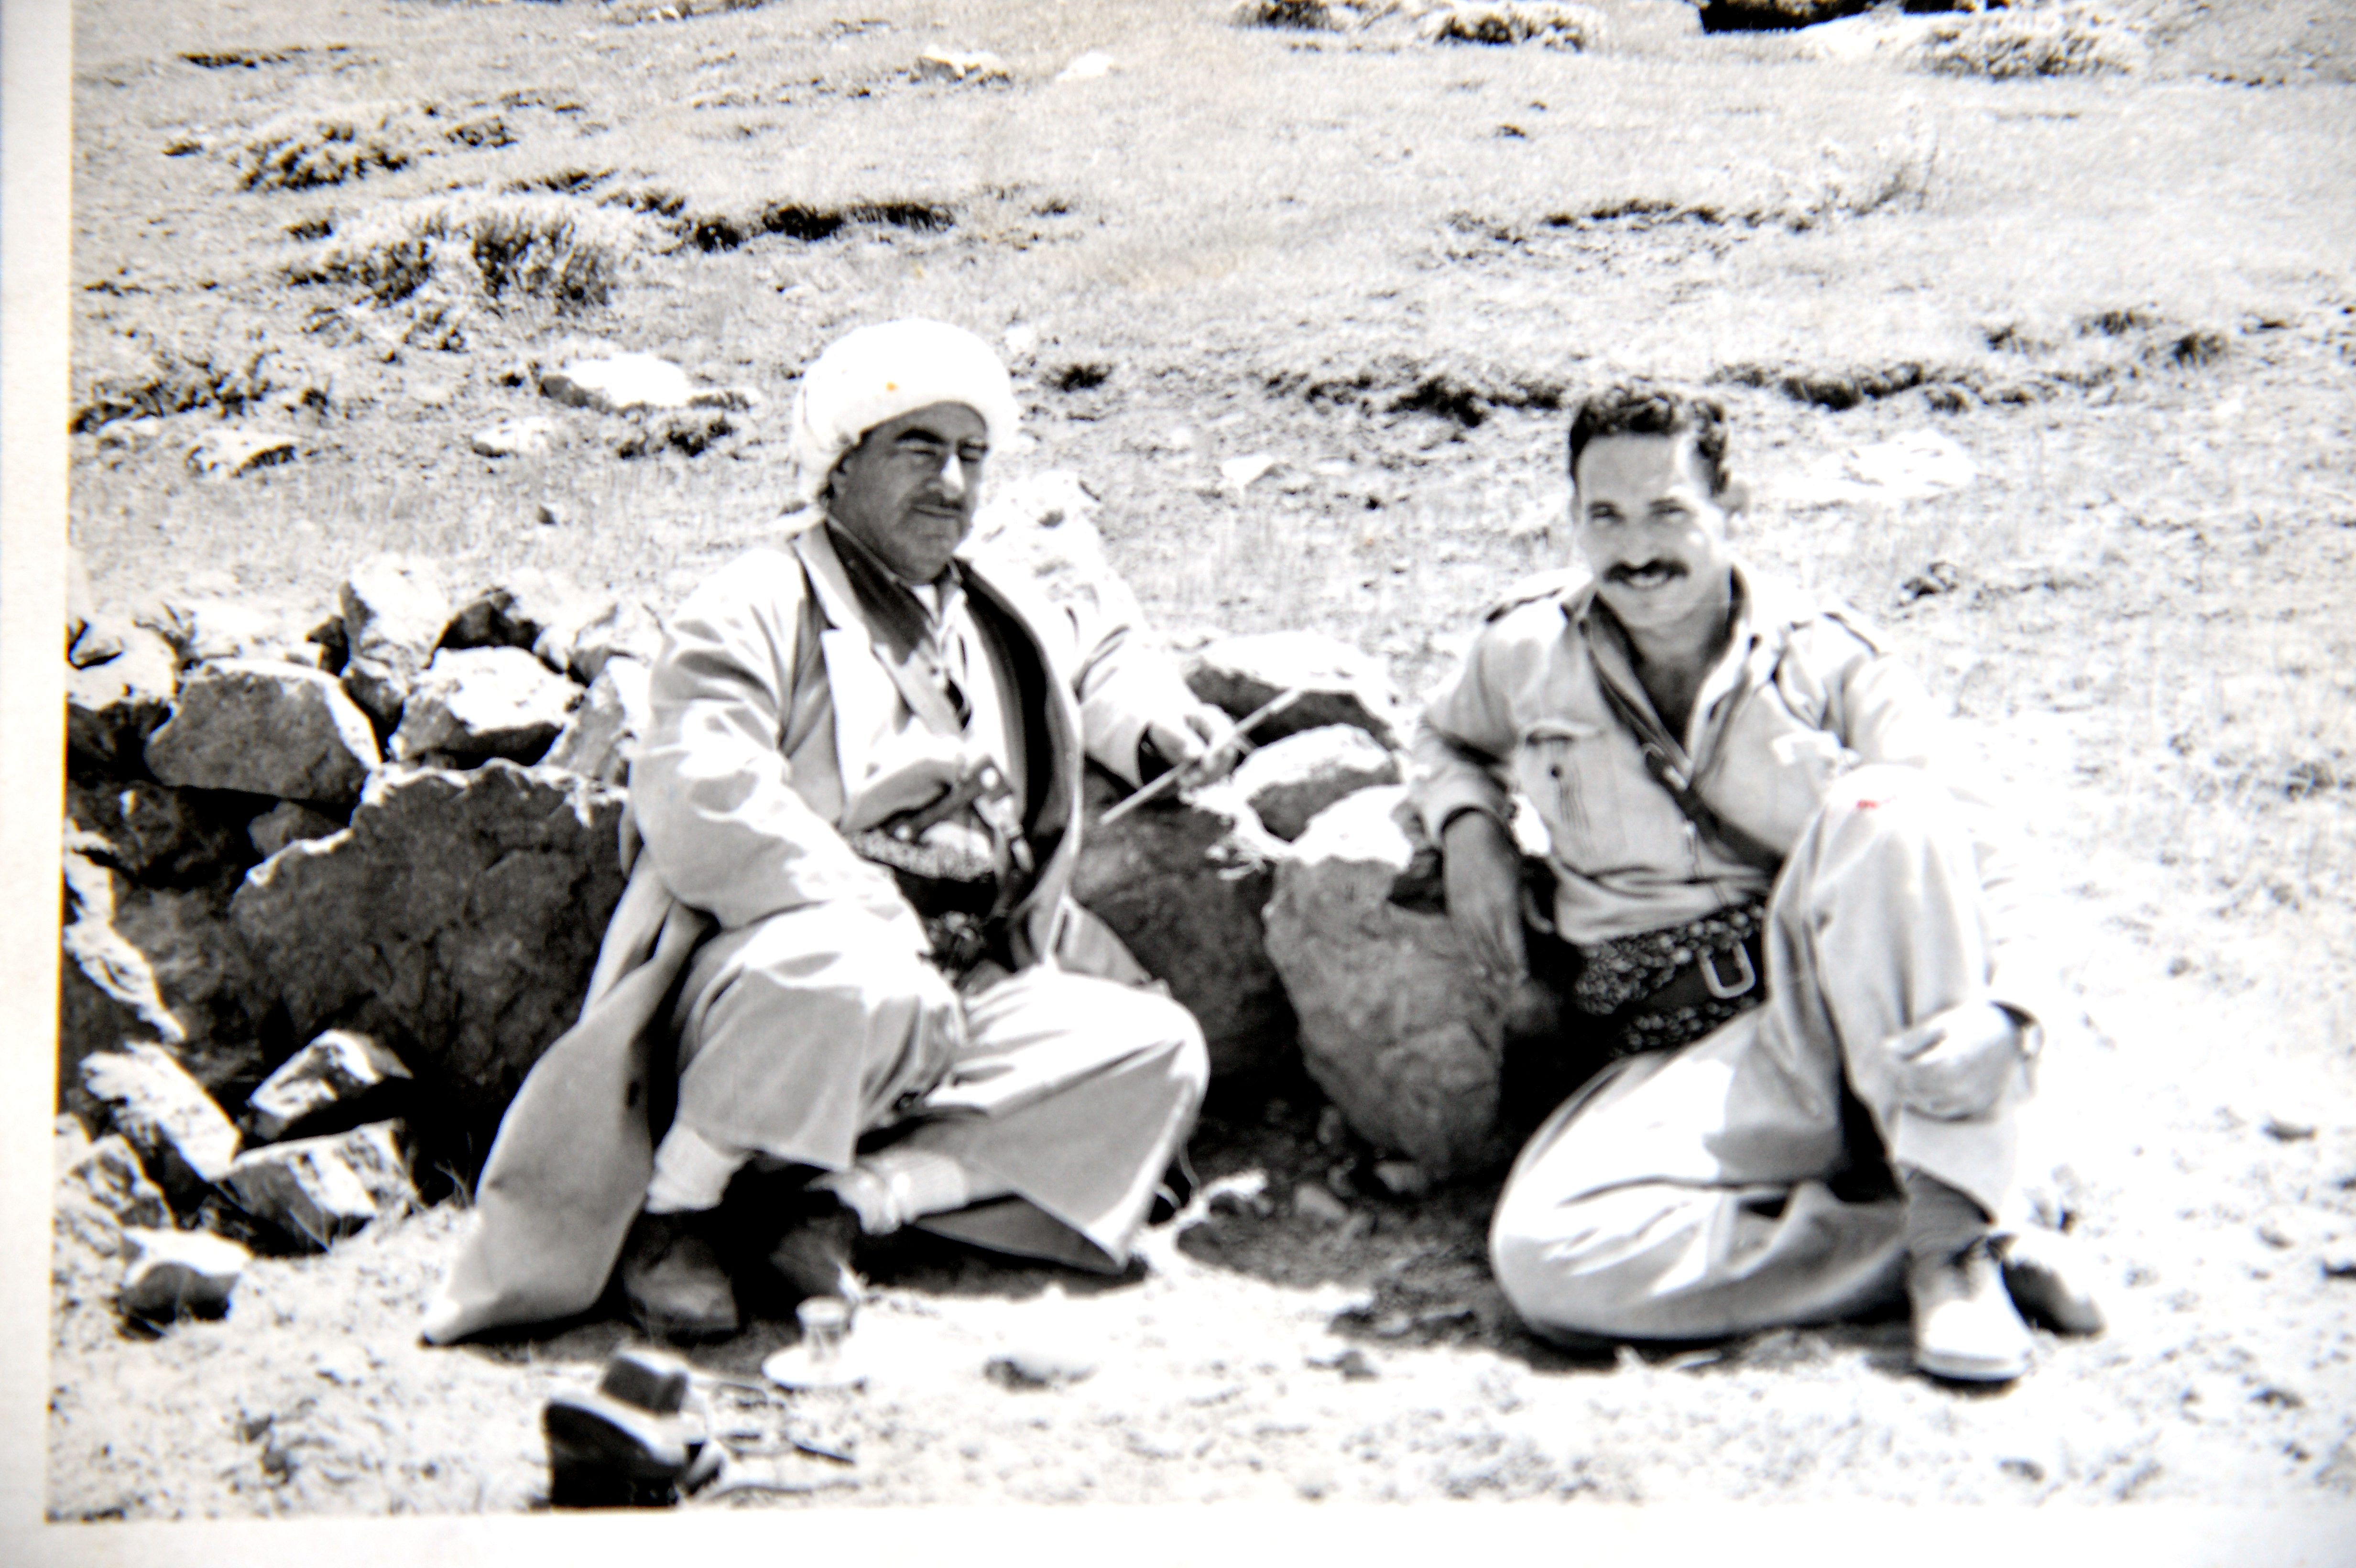 A long history of cooperation between Israelis and Kurds. Photo reproduction: Yossi Zeliger